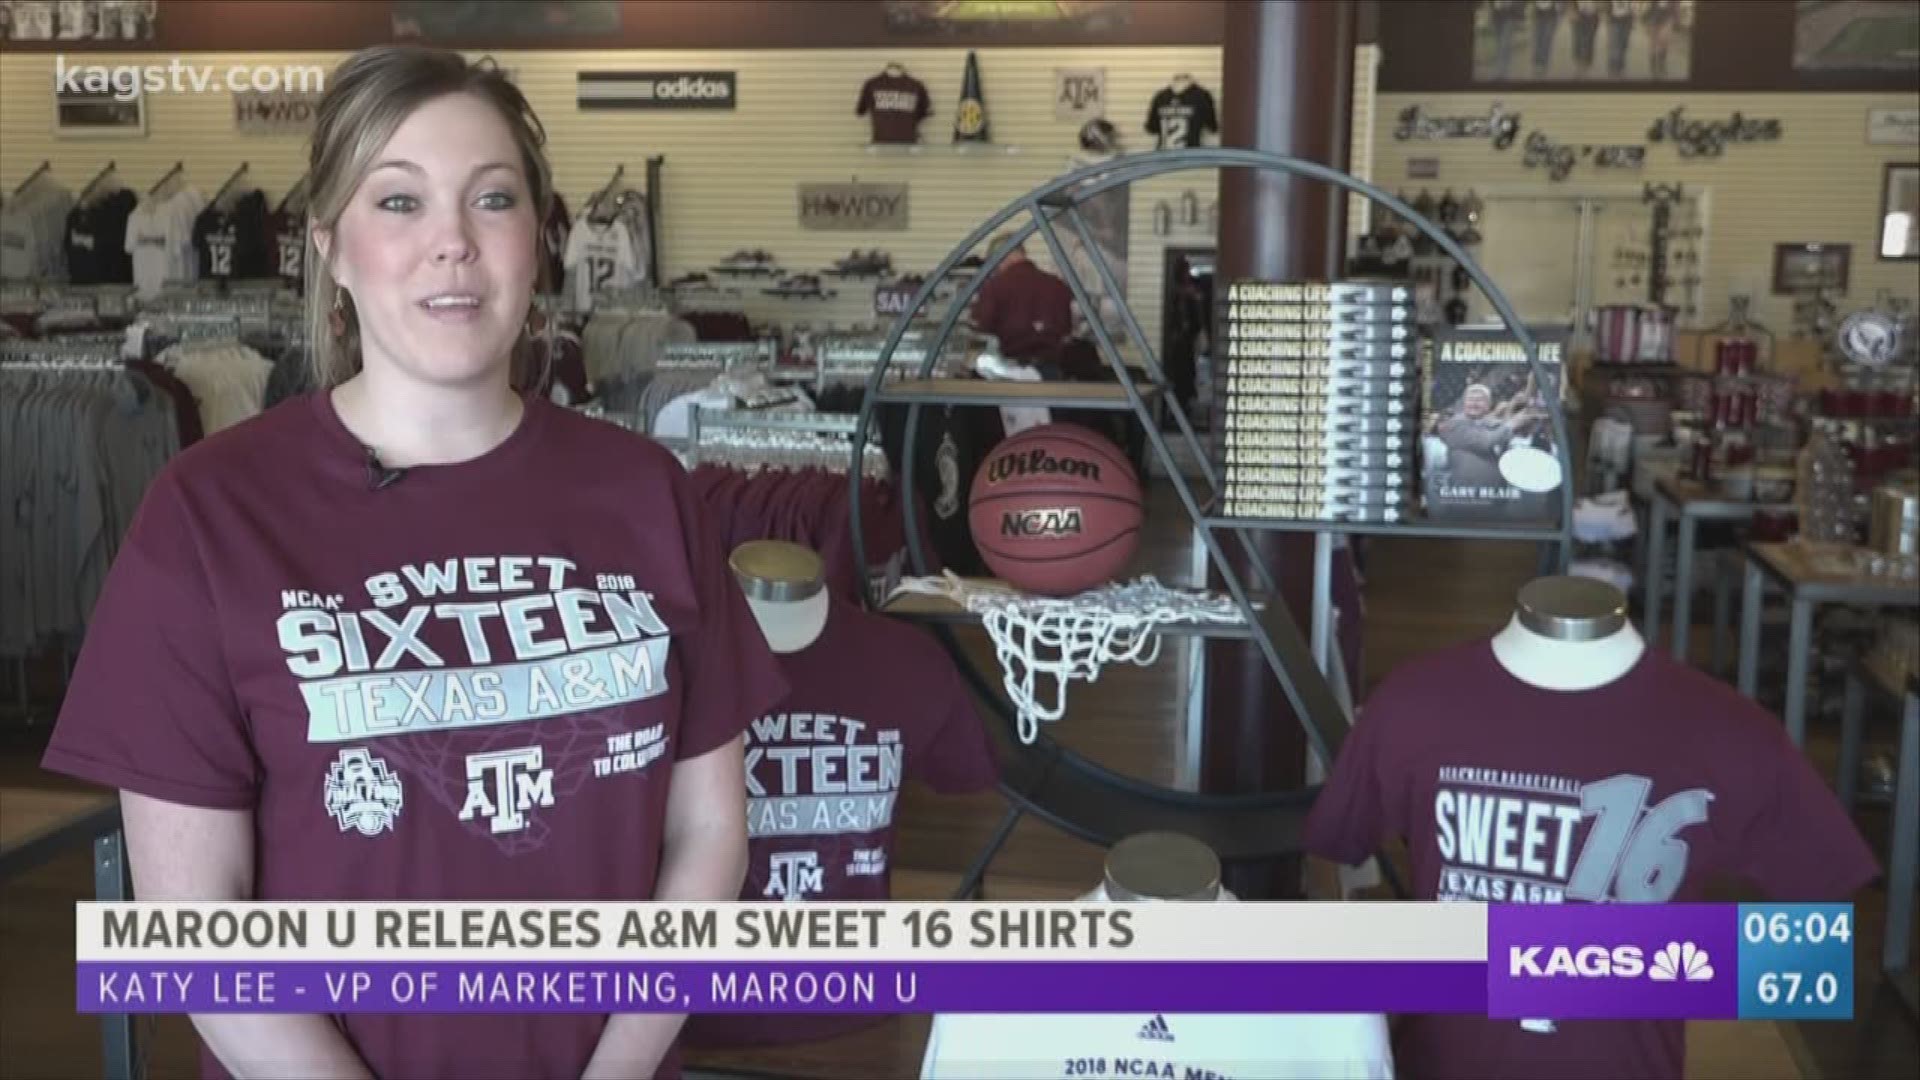 To celebrate the victories of both the Men's and Women's Aggie Basketball teams advancing to the Sweet 16, Maroon U  has stocked up on official Texas A&M Sweet 16 gear.